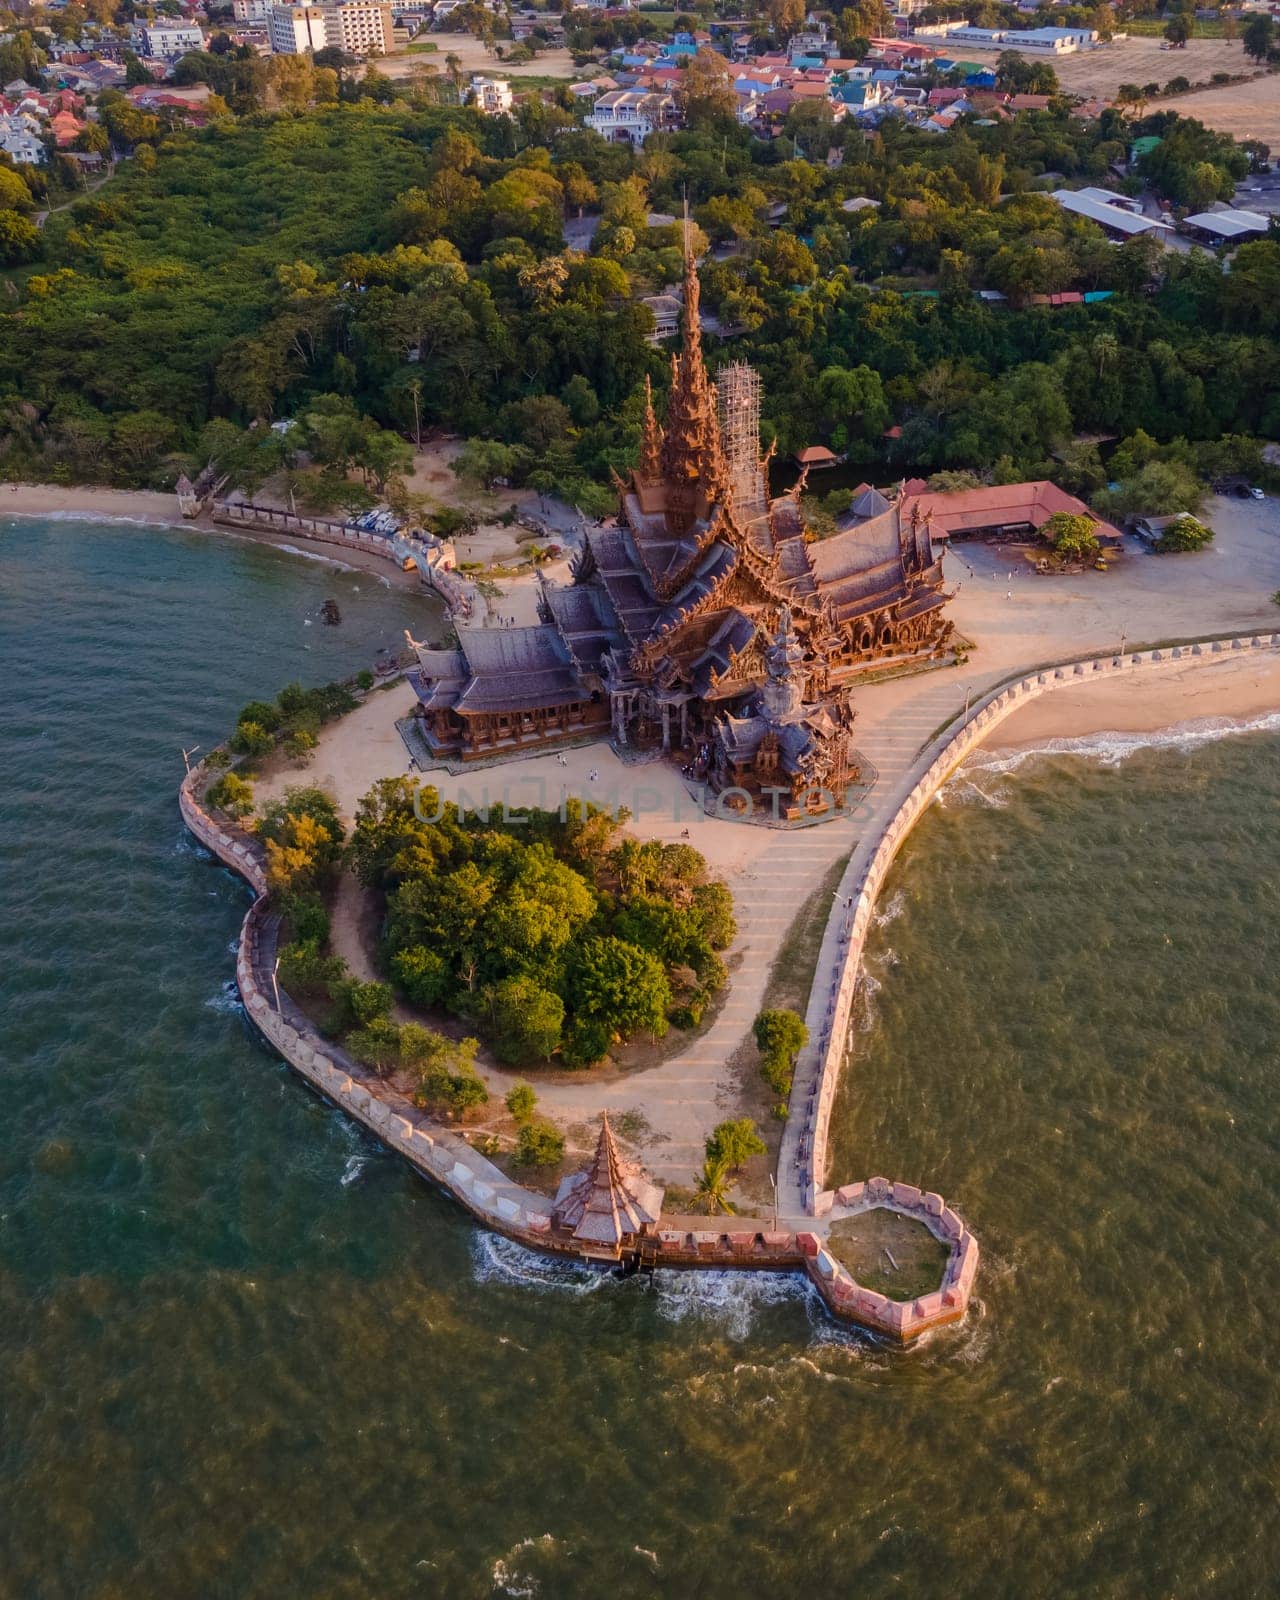 The Sanctuary of Truth wooden temple in Pattaya Thailand at sunset, wooden temple at the beach of Pattaya